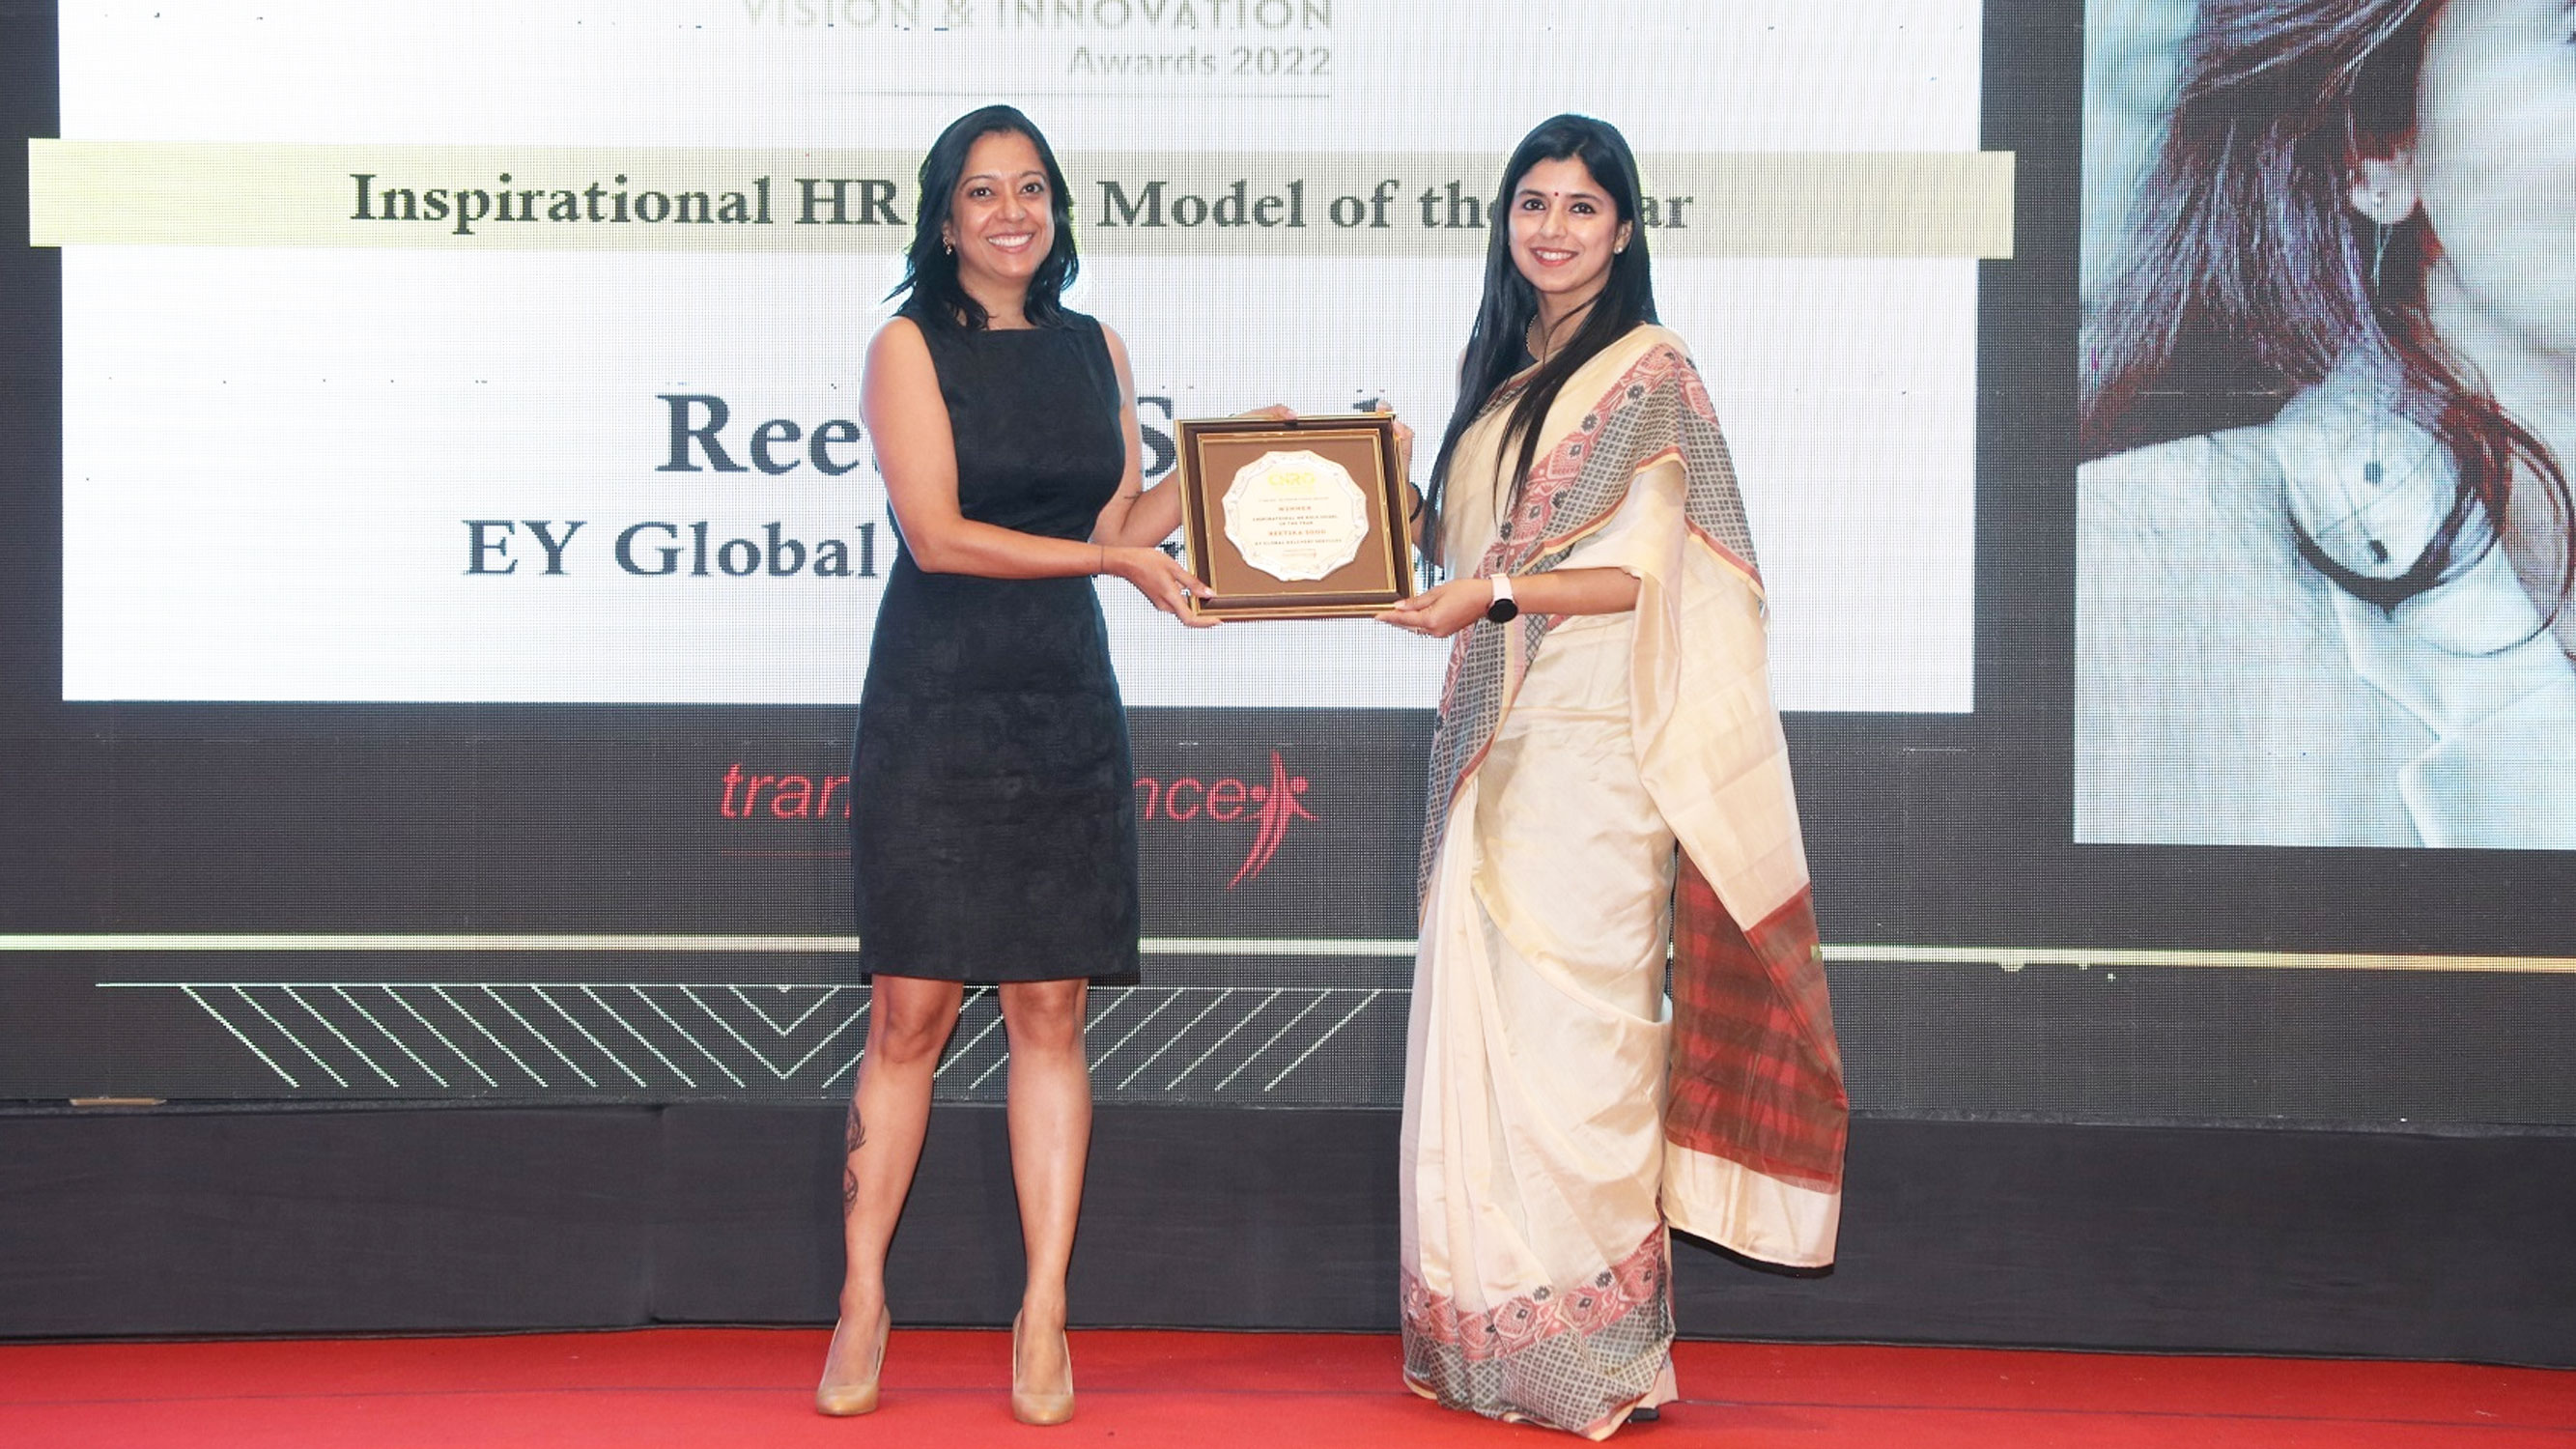 Reetika Sood, EY Global Delivery Services